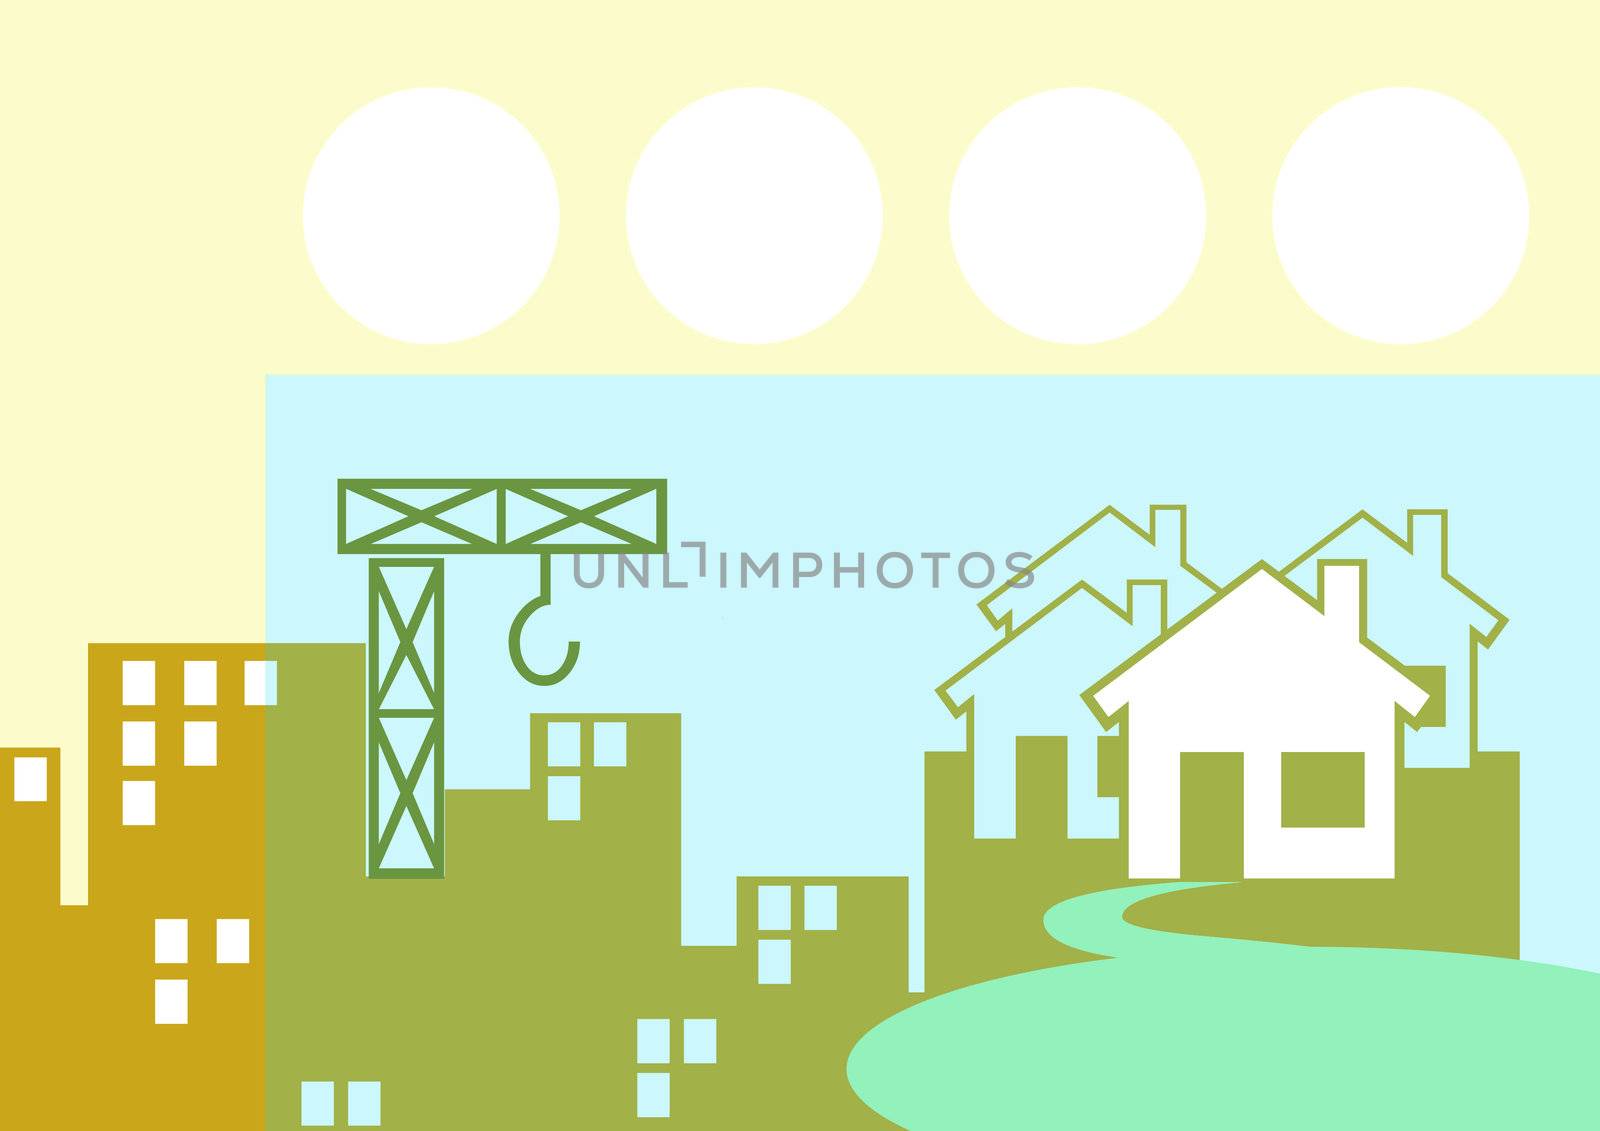 abstract creative symbolic image choice between town and country